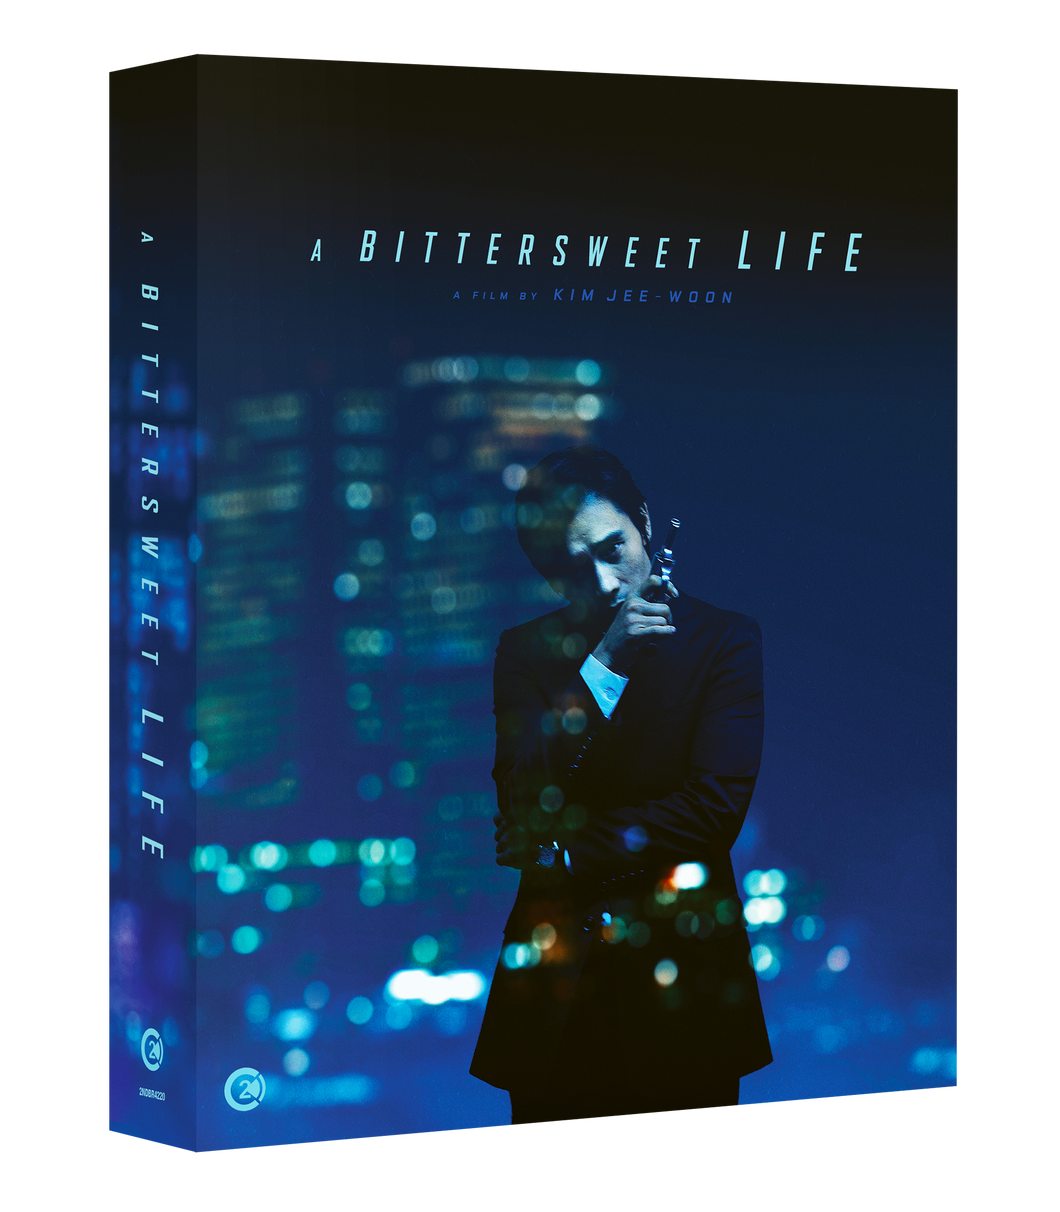 A Bittersweet Life Limited Edition 4K UHD & Blu-ray: Pre-order Available 22nd July